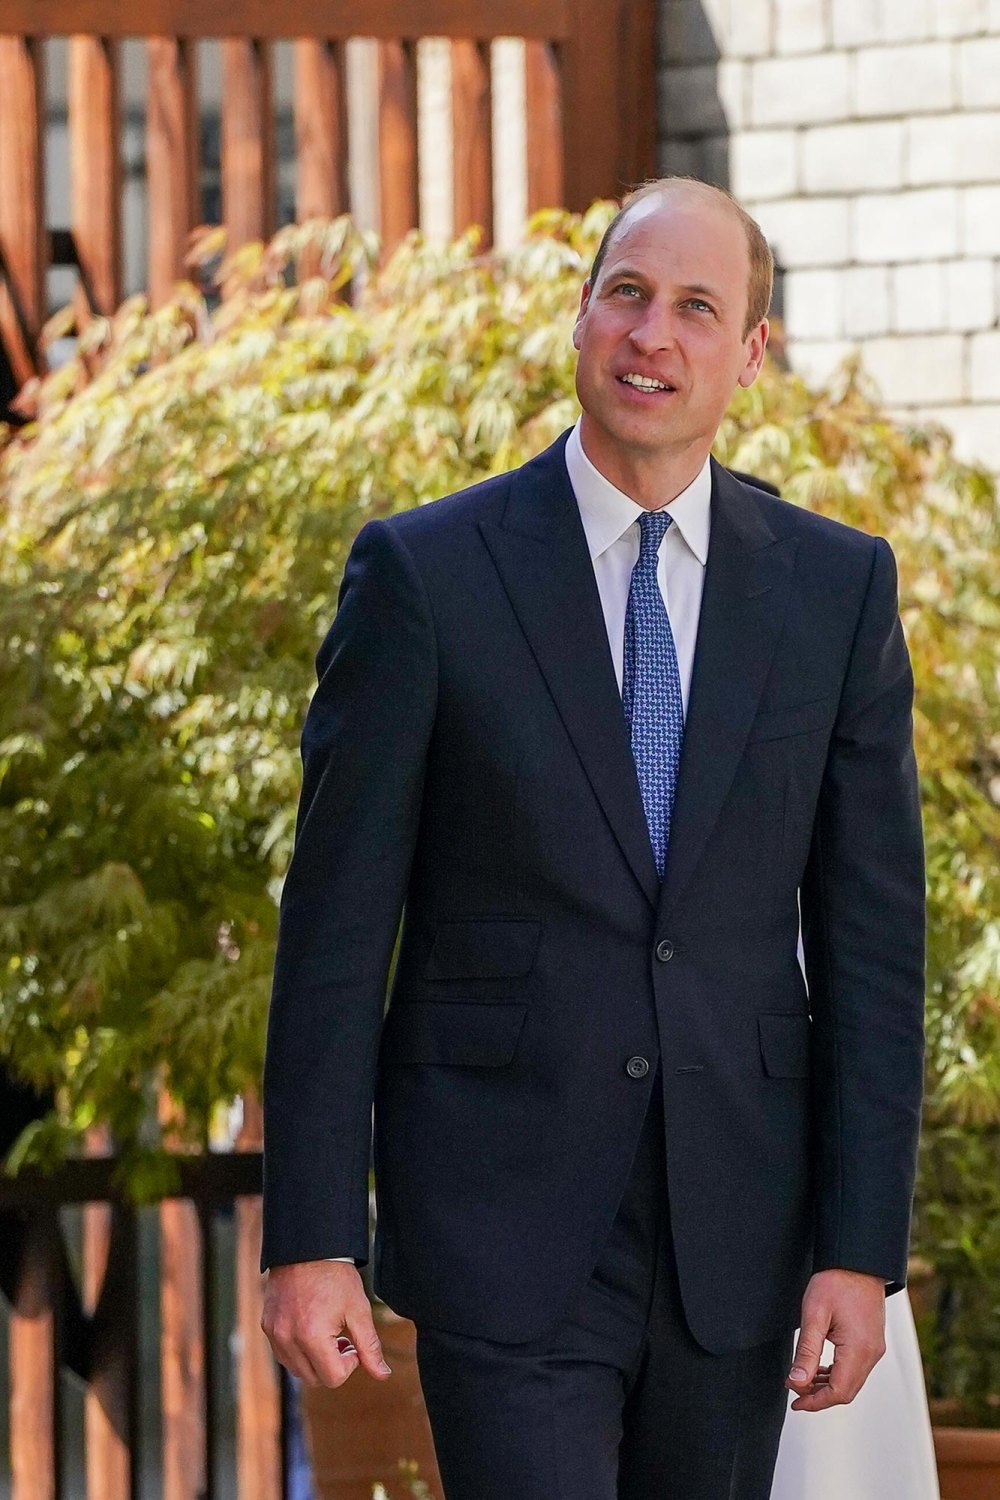 Prince William s Public Facing Duties Are Back in Full Swing 401